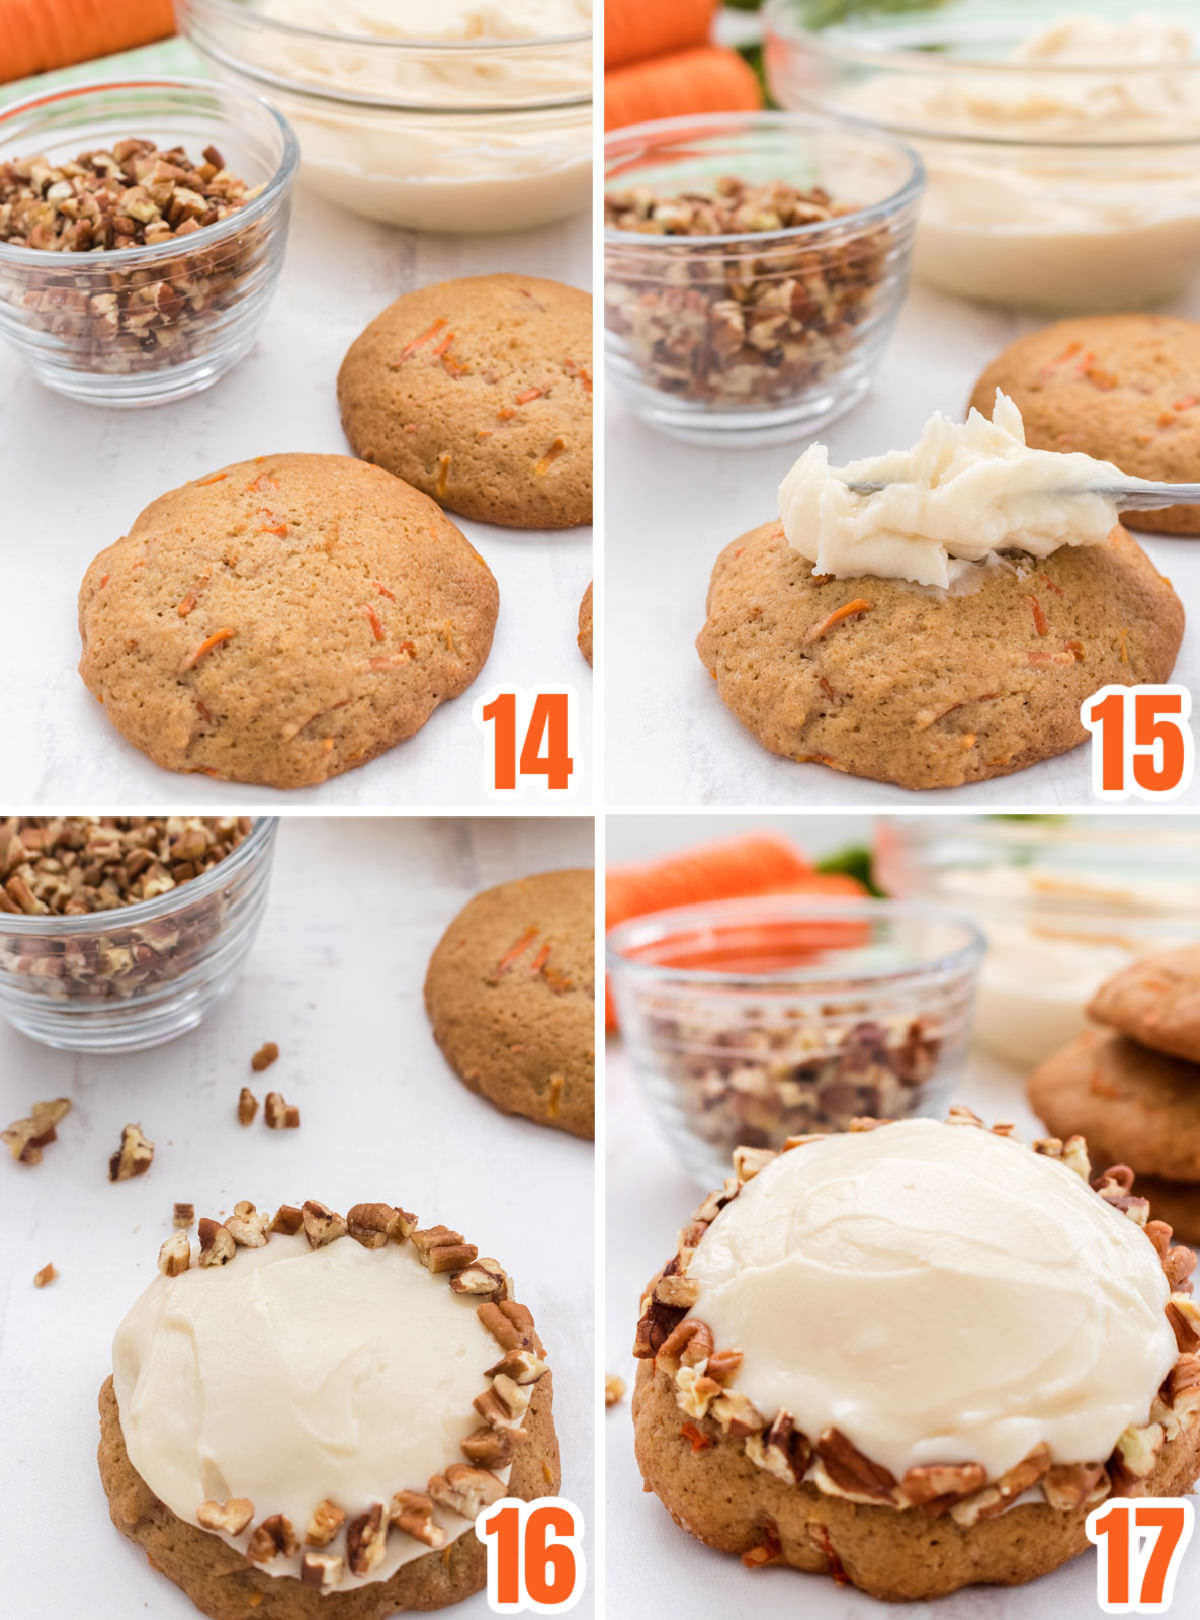 Collage image showing how to frost and decorate the Carrot Cake Cookies.